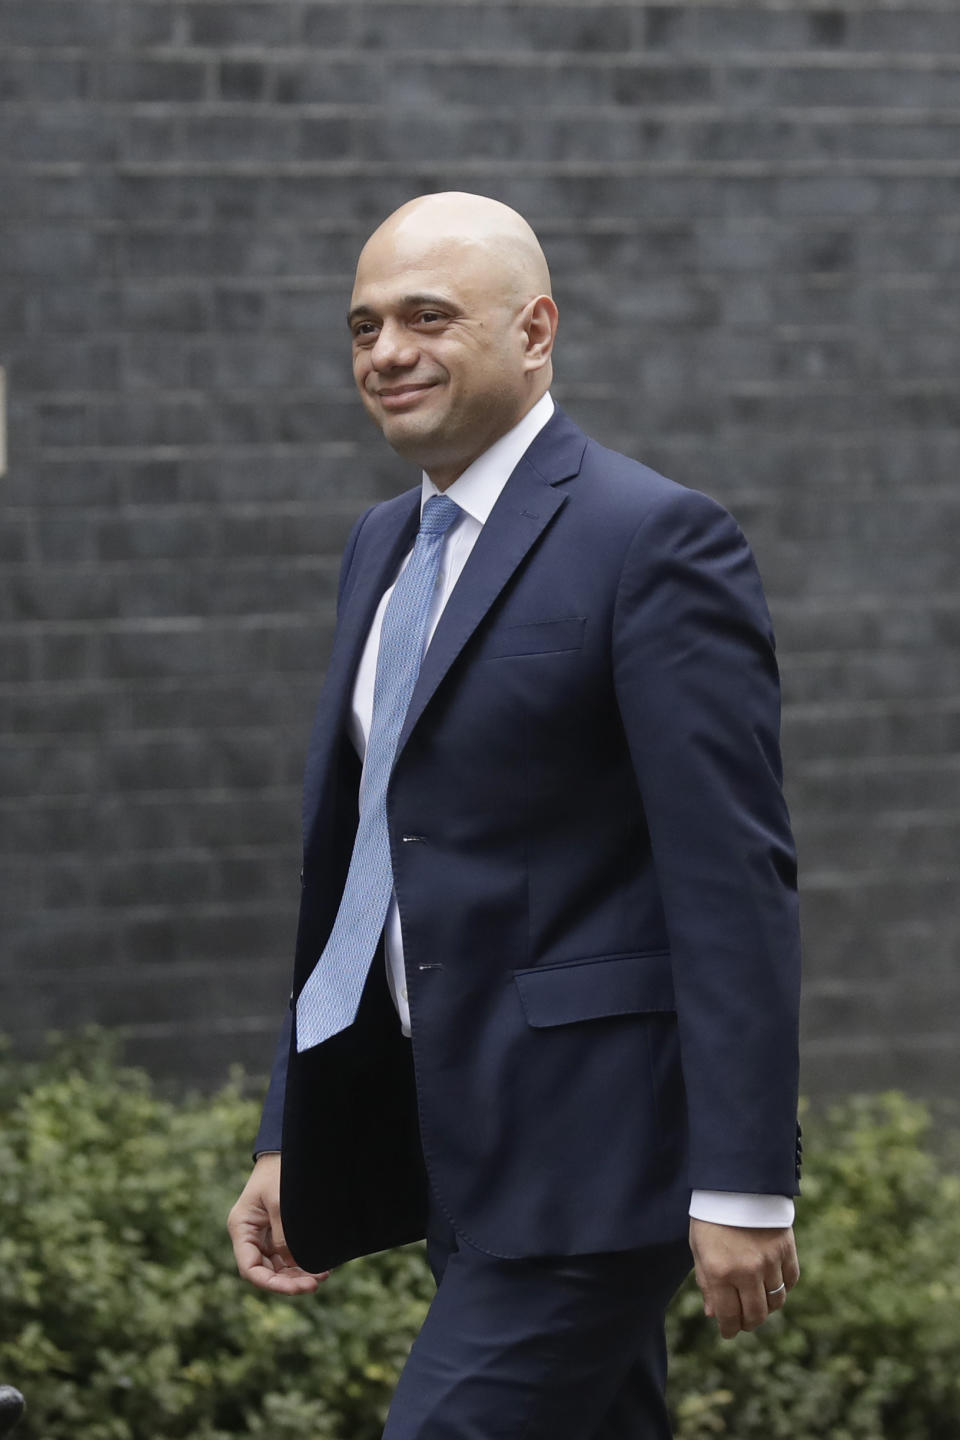 British lawmaker Sajid Javid Chancellor of the Exchequer walks along Downing Street in London, Thursday, Feb. 13, 2020. British Prime Minister Boris Johnson shook up his government on Thursday, firing and appointing ministers to key Cabinet posts. Johnson was aiming to tighten his grip on government after winning a big parliamentary majority in December's election. That victory allowed Johnson to take Britain out of the European Union in January. (AP Photo/Matt Dunham)